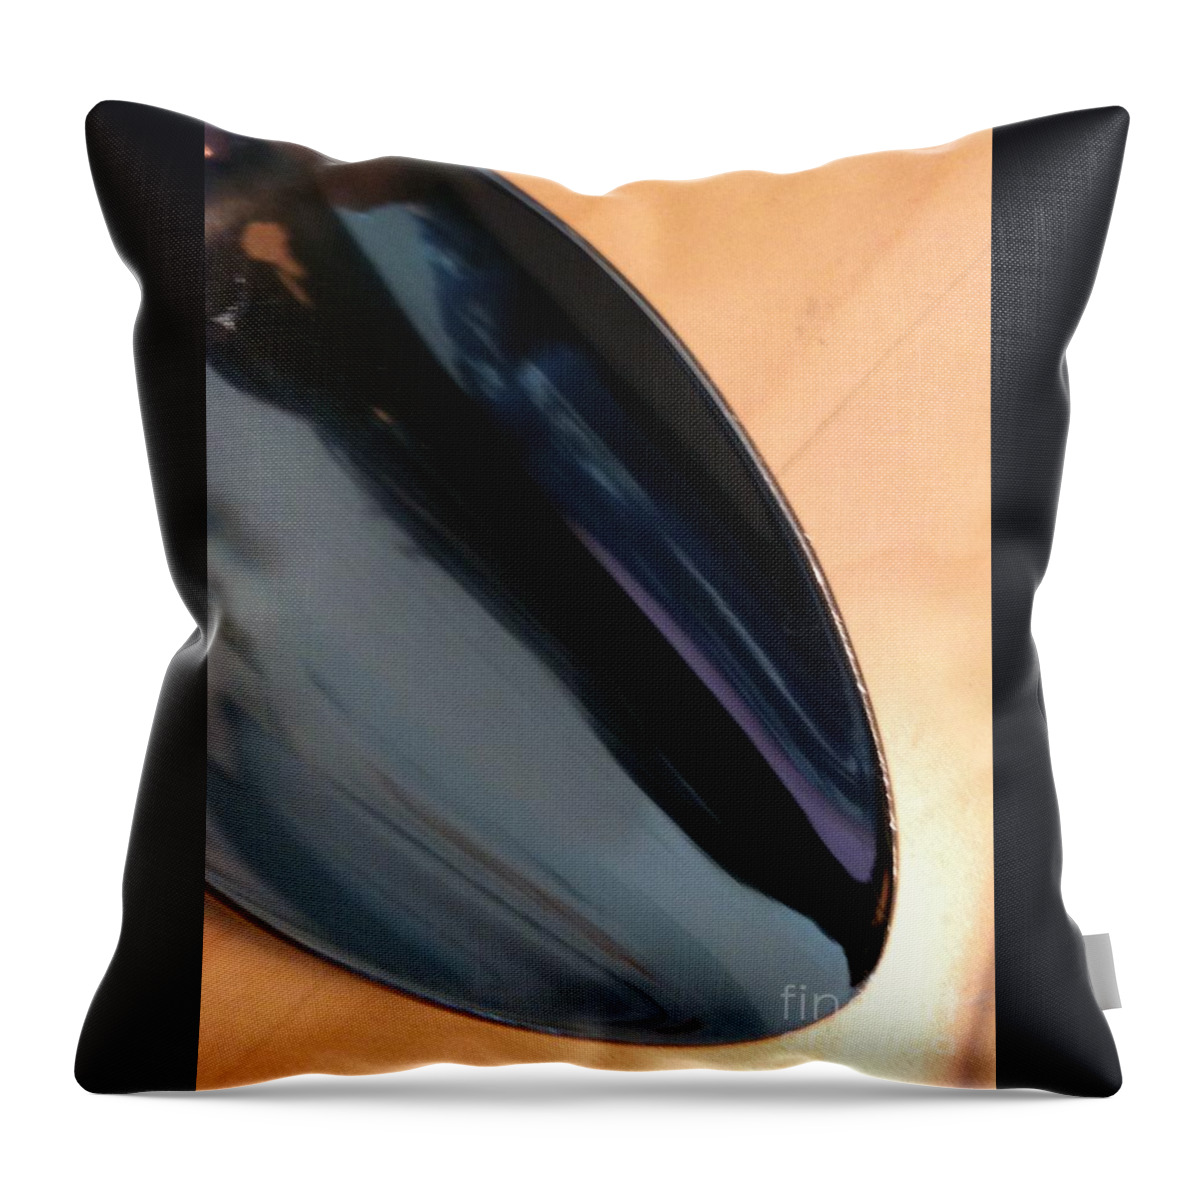  Throw Pillow featuring the photograph Spoon reflects by Mary Kobet